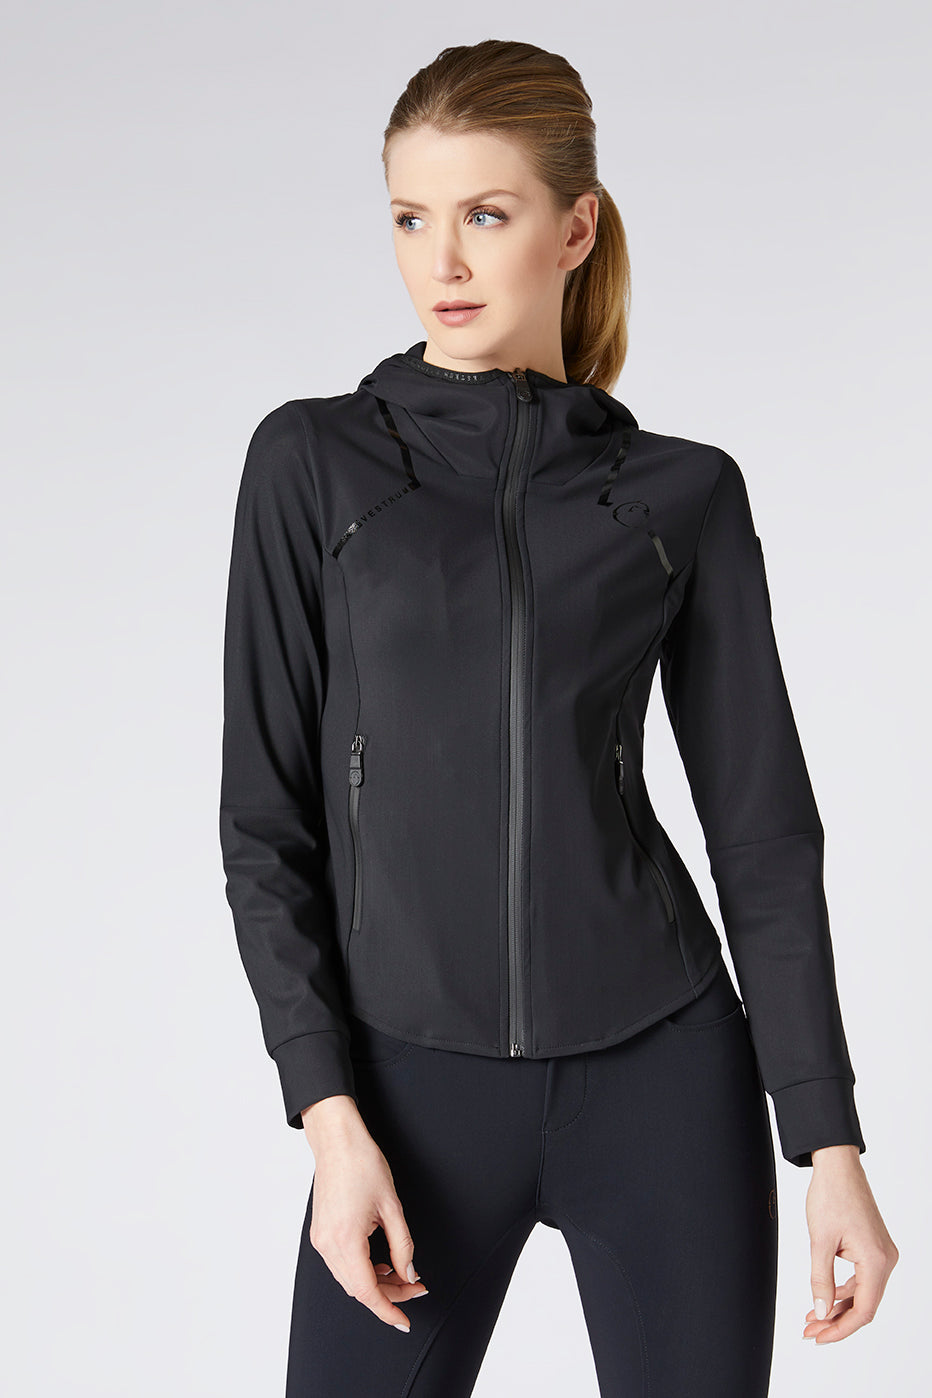 Fall in love with the VESTRUM FINES softshell jacket for women: waterproof elegance, versatile comfort and shiny details. Get them now!